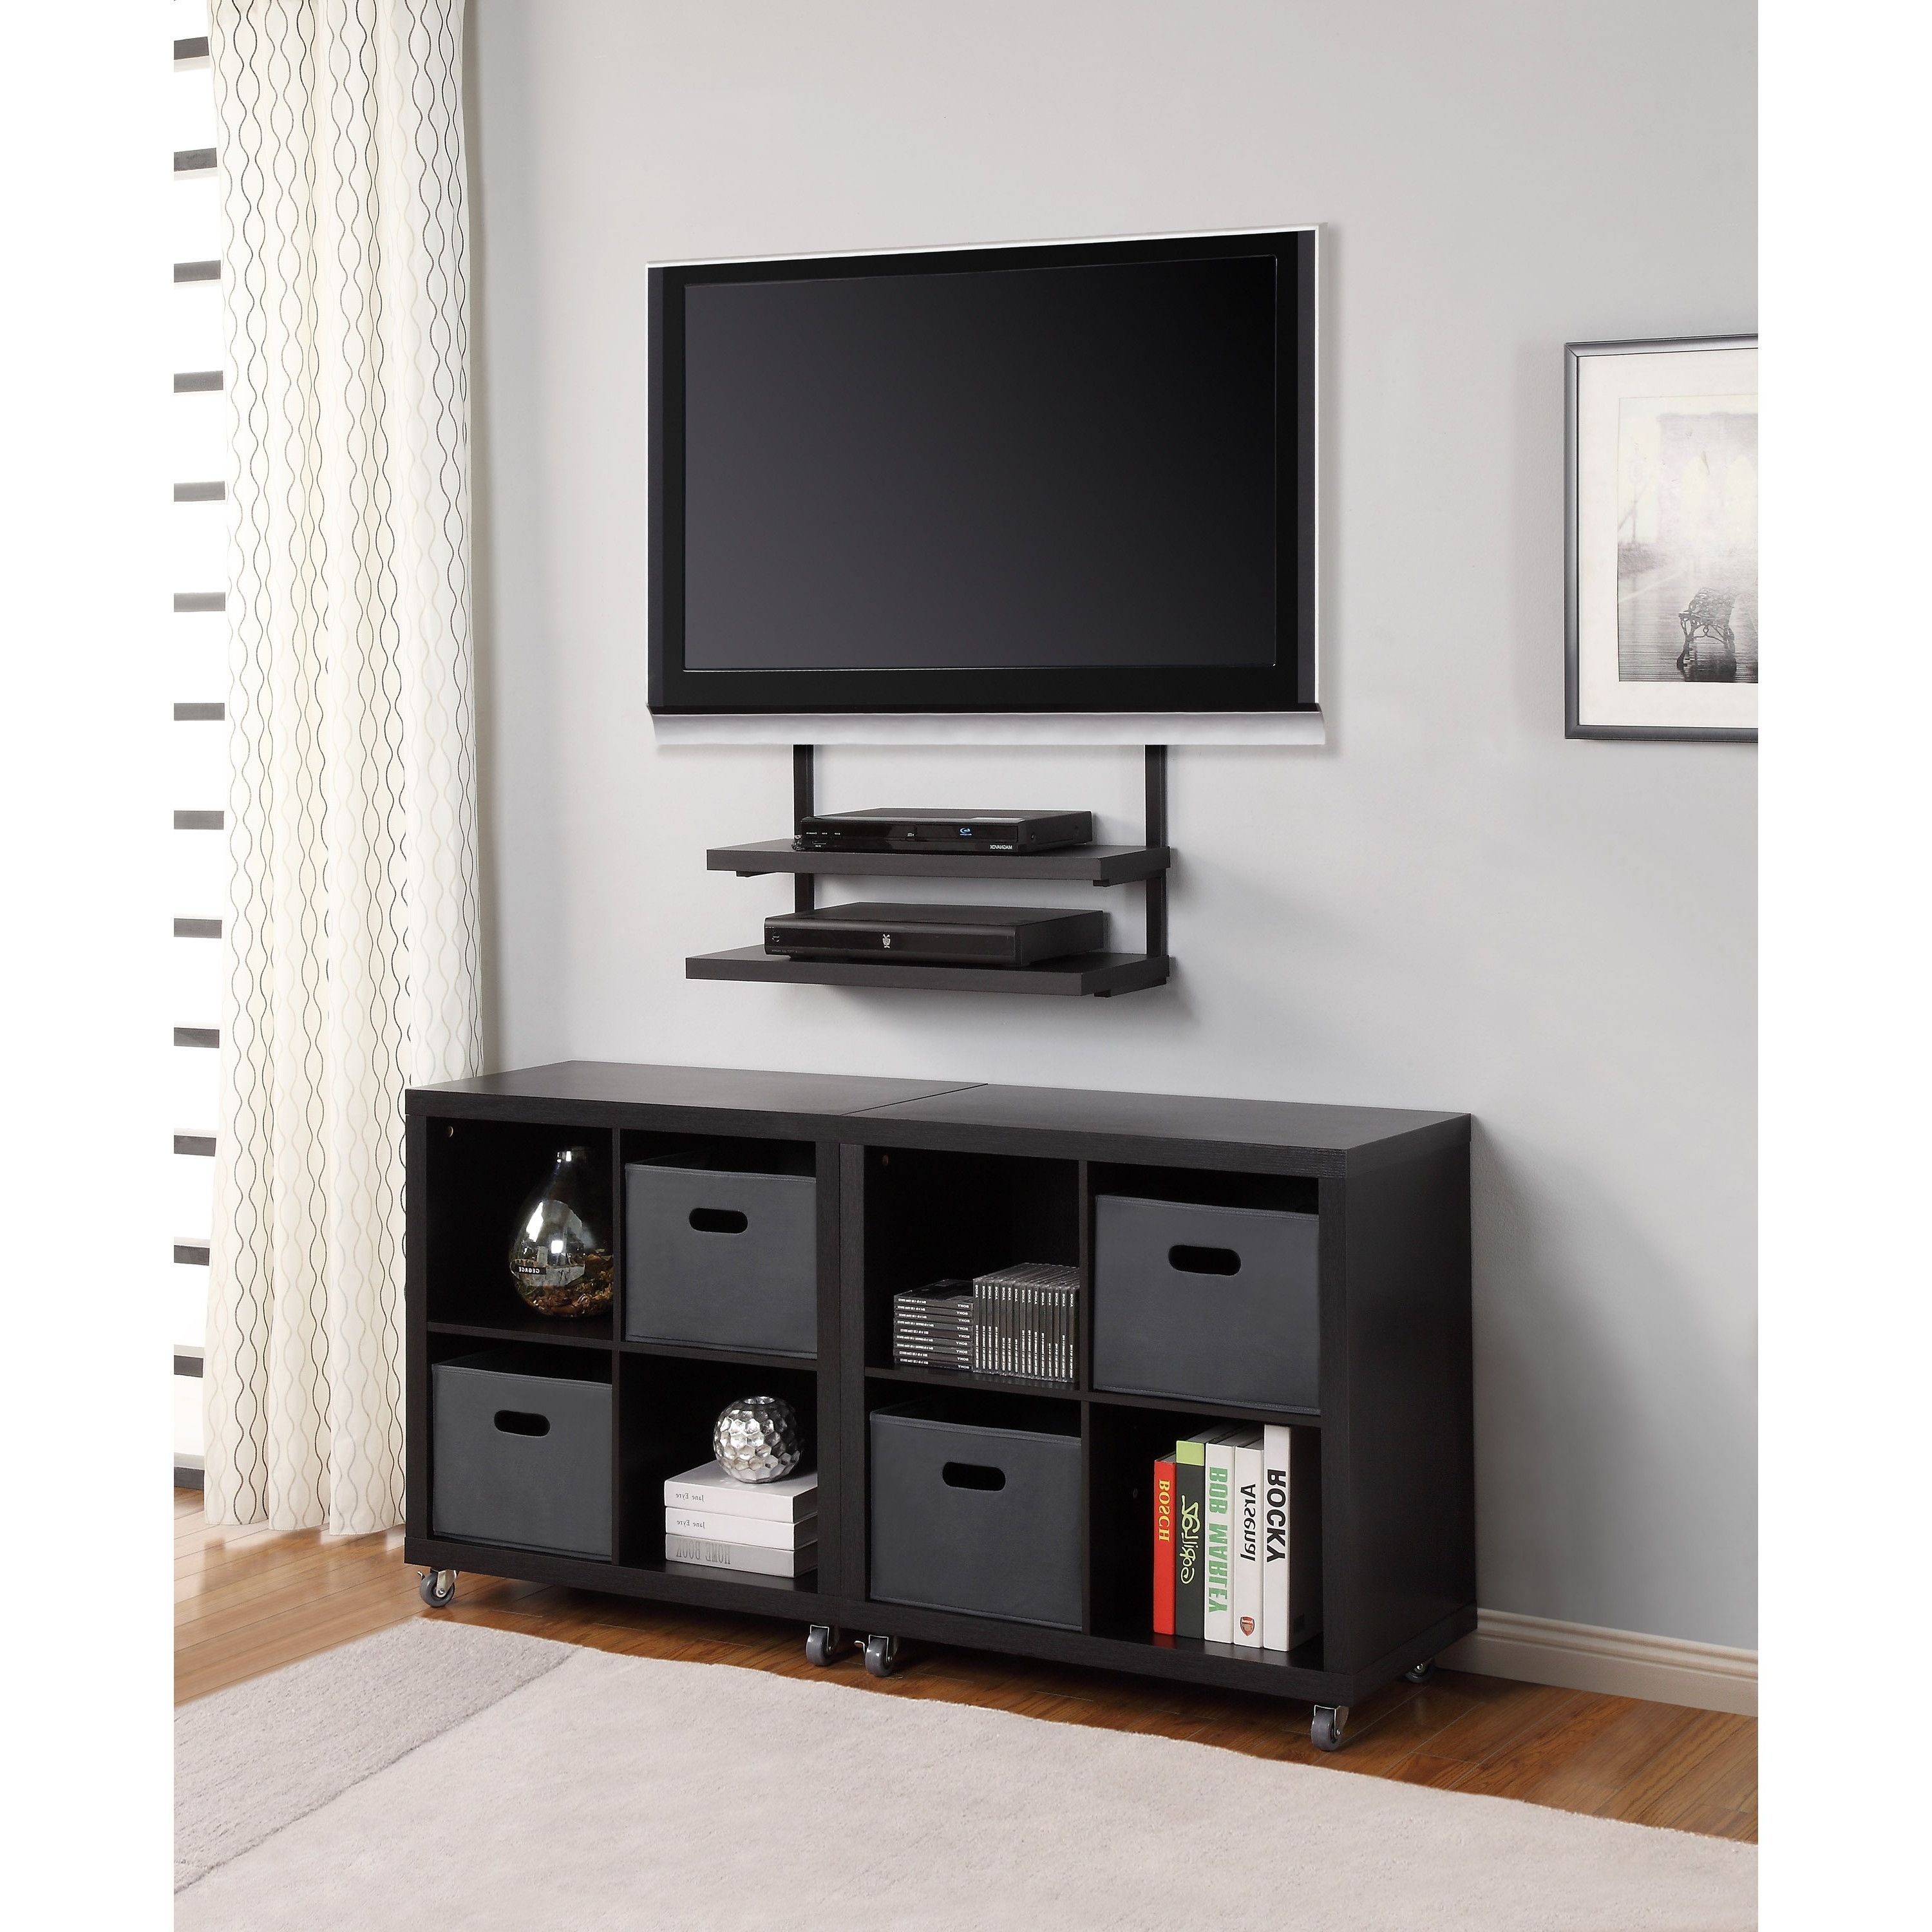 Simple Wall Tv Stand Cabinet Mounted Design Units Mount – Buyouapp Regarding Recent Wall Mounted Tv Cabinets For Flat Screens (View 10 of 20)